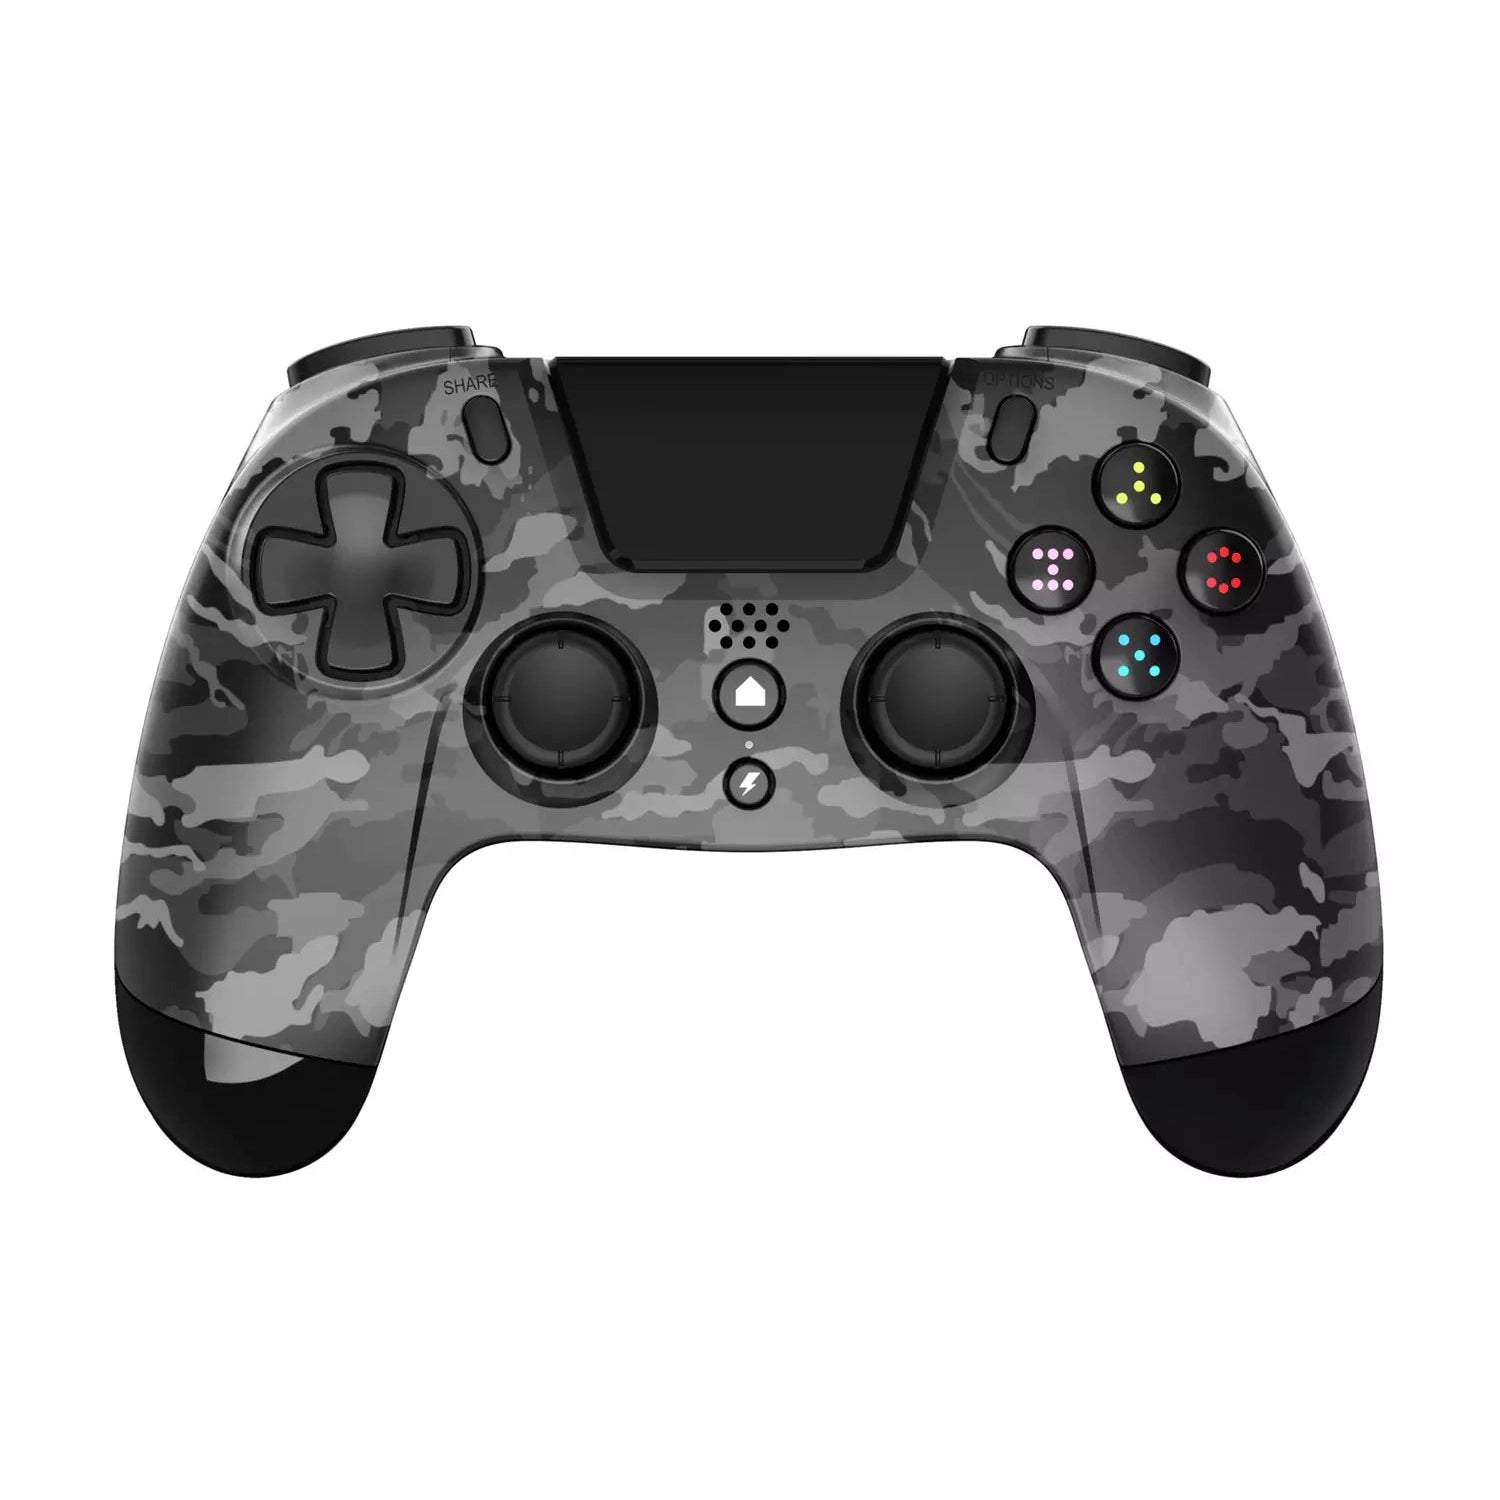 Gioteck VX-4 Wireless Controller for PS4 - Dark Camo - Refurbished Good